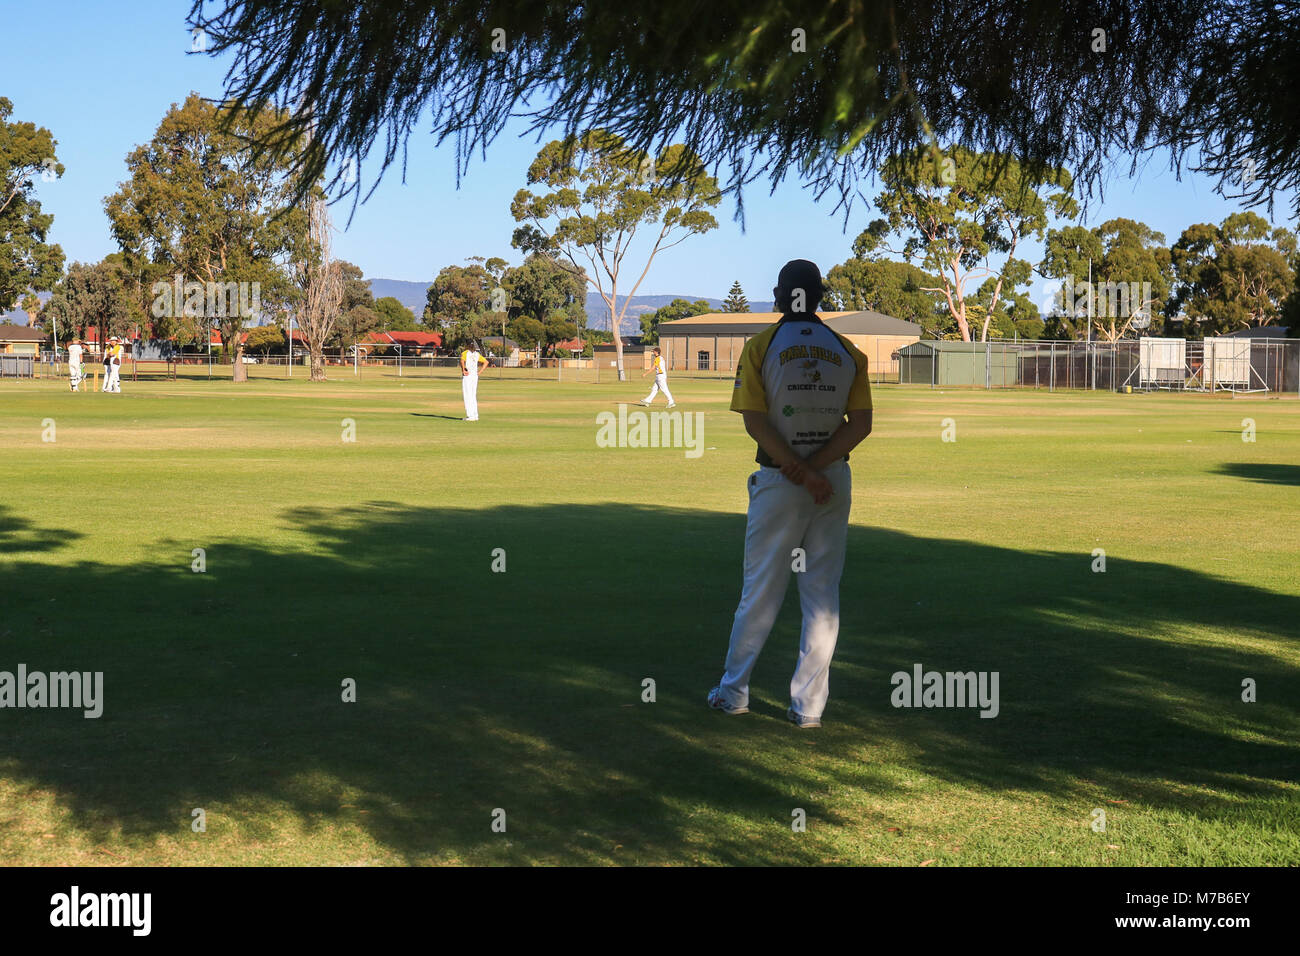 Adelaide Australia 10th March 2018. A Cricket player stands in the shade  during a local cricket match  on a hot summer day in Adelaide  as temperatures reach 37 degrees celsius Credit: amer ghazzal/Alamy Live News Stock Photo